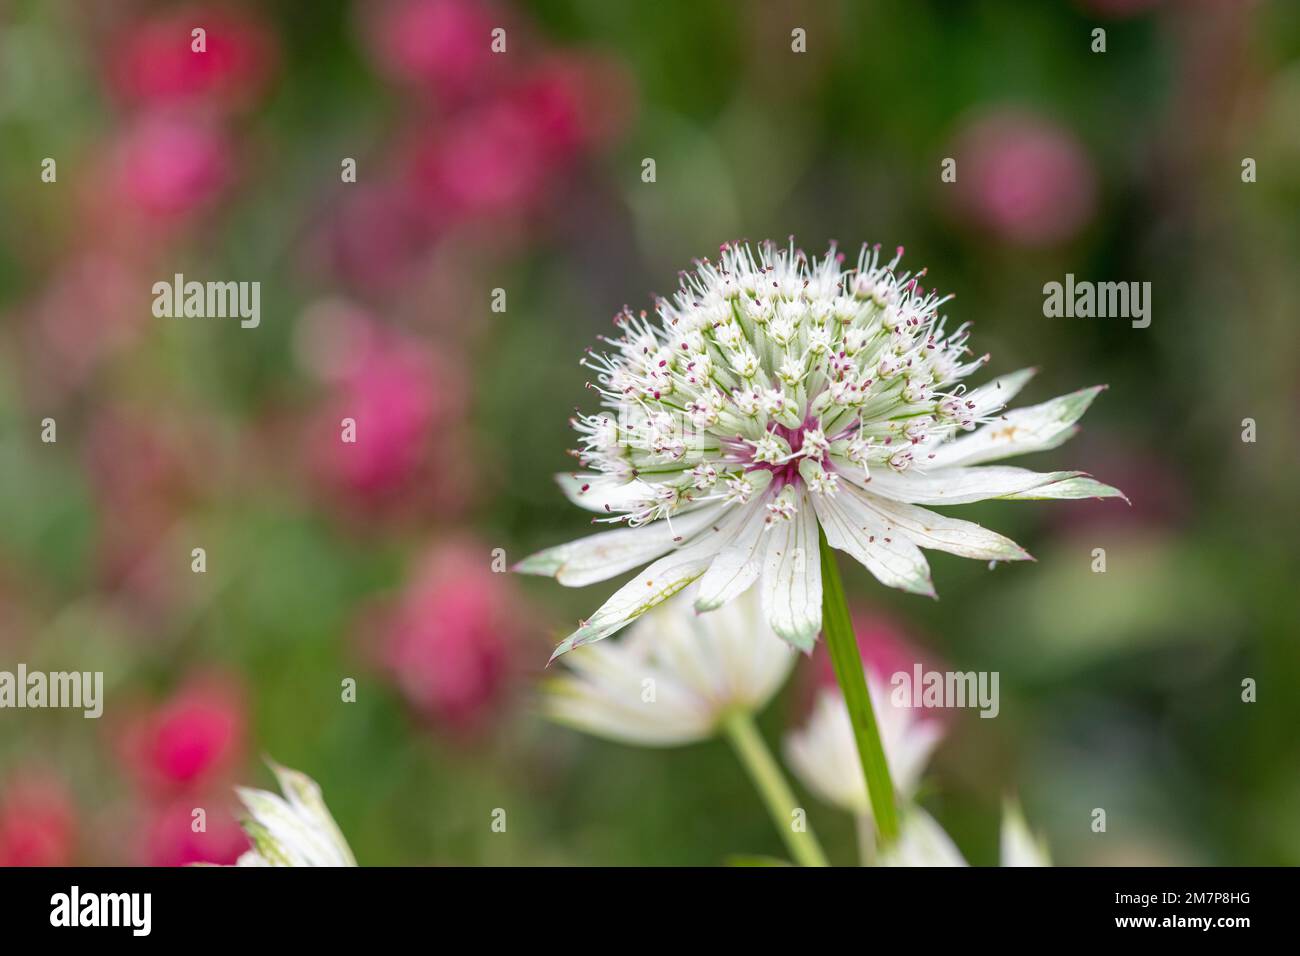 Close up of an astrantia flower in bloom Stock Photo